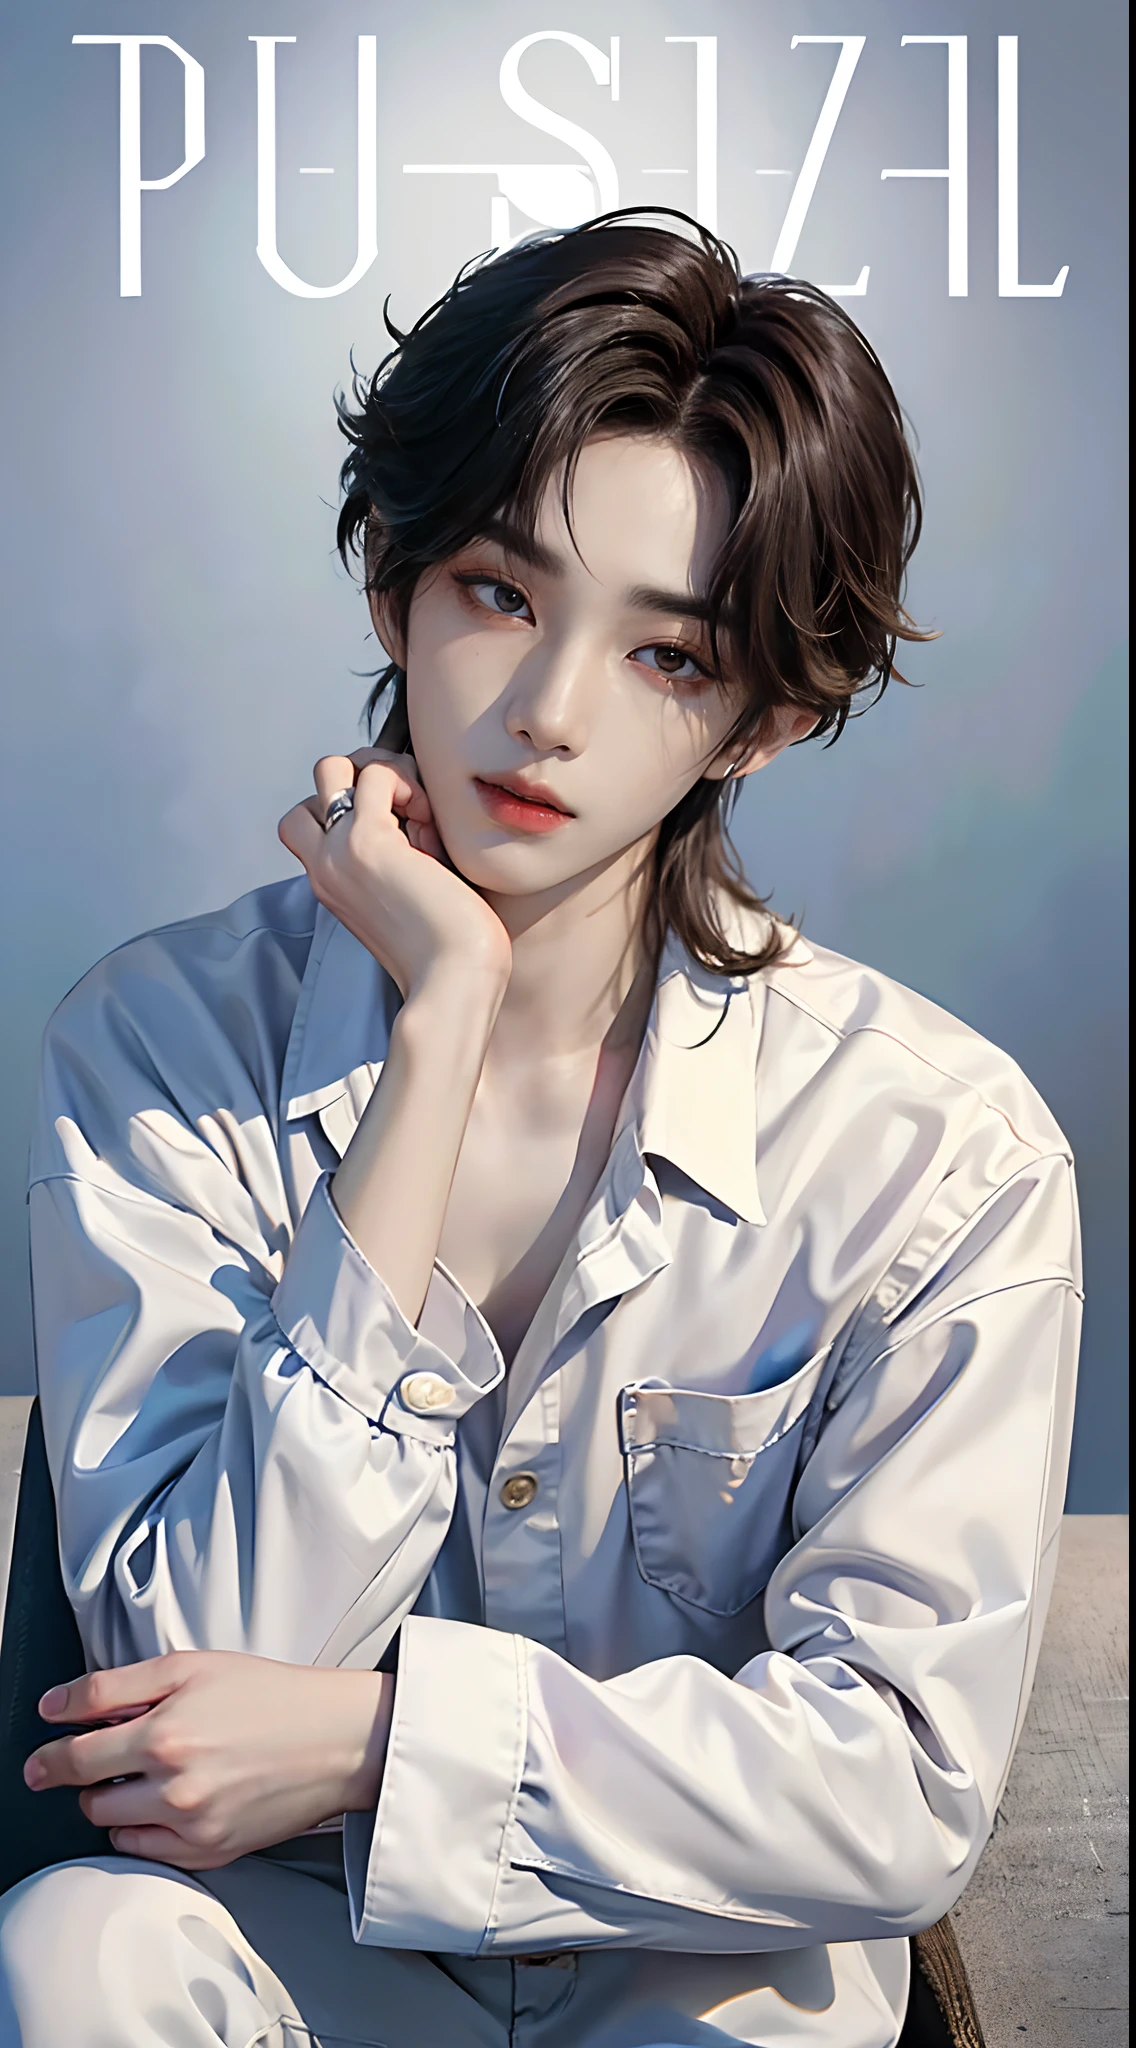 ((4K works))、​masterpiece、（top-quality)、((high-level image quality))、One Manly Boy、Slim body、((White Y-shirt and long black pants))、(Detailed beautiful eyeodel Magazines))、Face similar to Chaewon in Ruseraphim、((short hair above the ears))、((Smaller face))、((Neutral face))、((Light brown eyes))、((Korean boy))、((18year old))、((Handsome man))、((Wild look))、((Korean Makeup))、((elongated and sharp eyes))、((Photographed so that the whole body can be seen))、((Focus zoom out))、((Model Magazine Cover))、((model poseodel photo))、Professional Photoagazine covers))